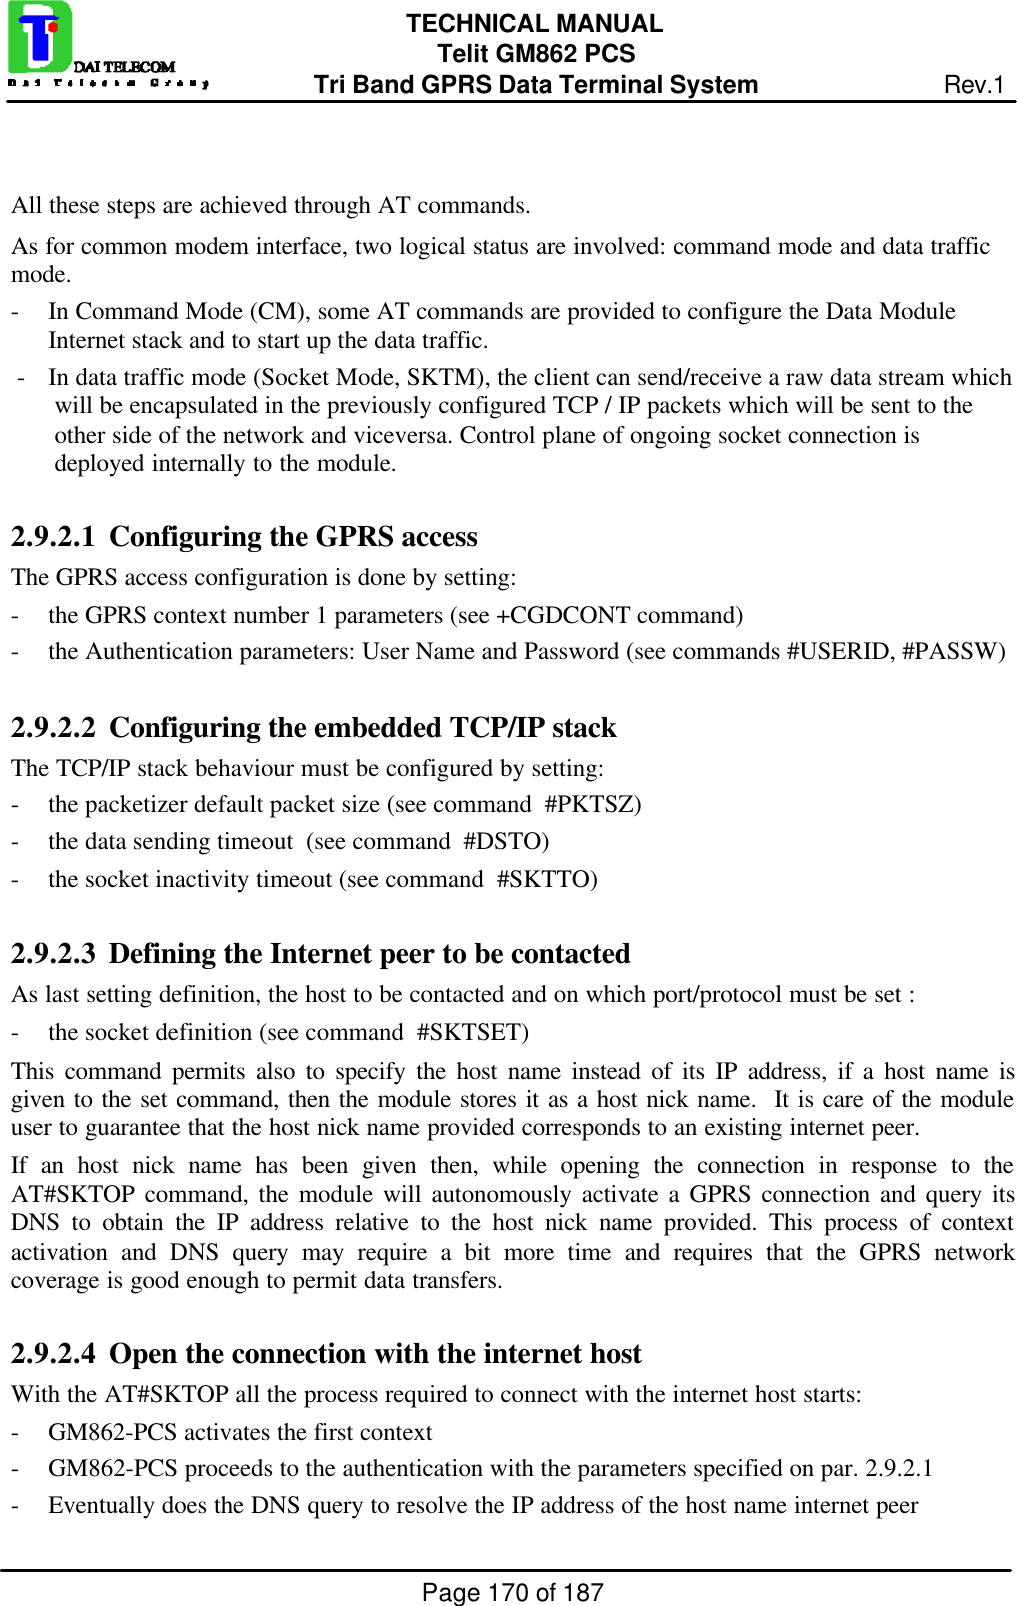 Page 170 of 187TECHNICAL MANUALTelit GM862 PCSTri Band GPRS Data Terminal System Rev.1All these steps are achieved through AT commands.As for common modem interface, two logical status are involved: command mode and data trafficmode.- In Command Mode (CM), some AT commands are provided to configure the Data ModuleInternet stack and to start up the data traffic.- In data traffic mode (Socket Mode, SKTM), the client can send/receive a raw data stream whichwill be encapsulated in the previously configured TCP / IP packets which will be sent to theother side of the network and viceversa. Control plane of ongoing socket connection isdeployed internally to the module.2.9.2.1  Configuring the GPRS accessThe GPRS access configuration is done by setting:- the GPRS context number 1 parameters (see +CGDCONT command)- the Authentication parameters: User Name and Password (see commands #USERID, #PASSW)2.9.2.2  Configuring the embedded TCP/IP stackThe TCP/IP stack behaviour must be configured by setting:- the packetizer default packet size (see command  #PKTSZ)- the data sending timeout  (see command  #DSTO)- the socket inactivity timeout (see command  #SKTTO)2.9.2.3  Defining the Internet peer to be contactedAs last setting definition, the host to be contacted and on which port/protocol must be set :- the socket definition (see command  #SKTSET)This command permits also to specify the host name instead of its IP address, if a host name isgiven to the set command, then the module stores it as a host nick name.  It is care of the moduleuser to guarantee that the host nick name provided corresponds to an existing internet peer.If an host nick name has been given then, while opening the connection in response to theAT#SKTOP command, the module will autonomously activate a GPRS connection and query itsDNS to obtain the IP address relative to the host nick name provided. This process of contextactivation and DNS query may require a bit more time and requires that the GPRS networkcoverage is good enough to permit data transfers.2.9.2.4  Open the connection with the internet hostWith the AT#SKTOP all the process required to connect with the internet host starts:- GM862-PCS activates the first context- GM862-PCS proceeds to the authentication with the parameters specified on par. 2.9.2.1- Eventually does the DNS query to resolve the IP address of the host name internet peer